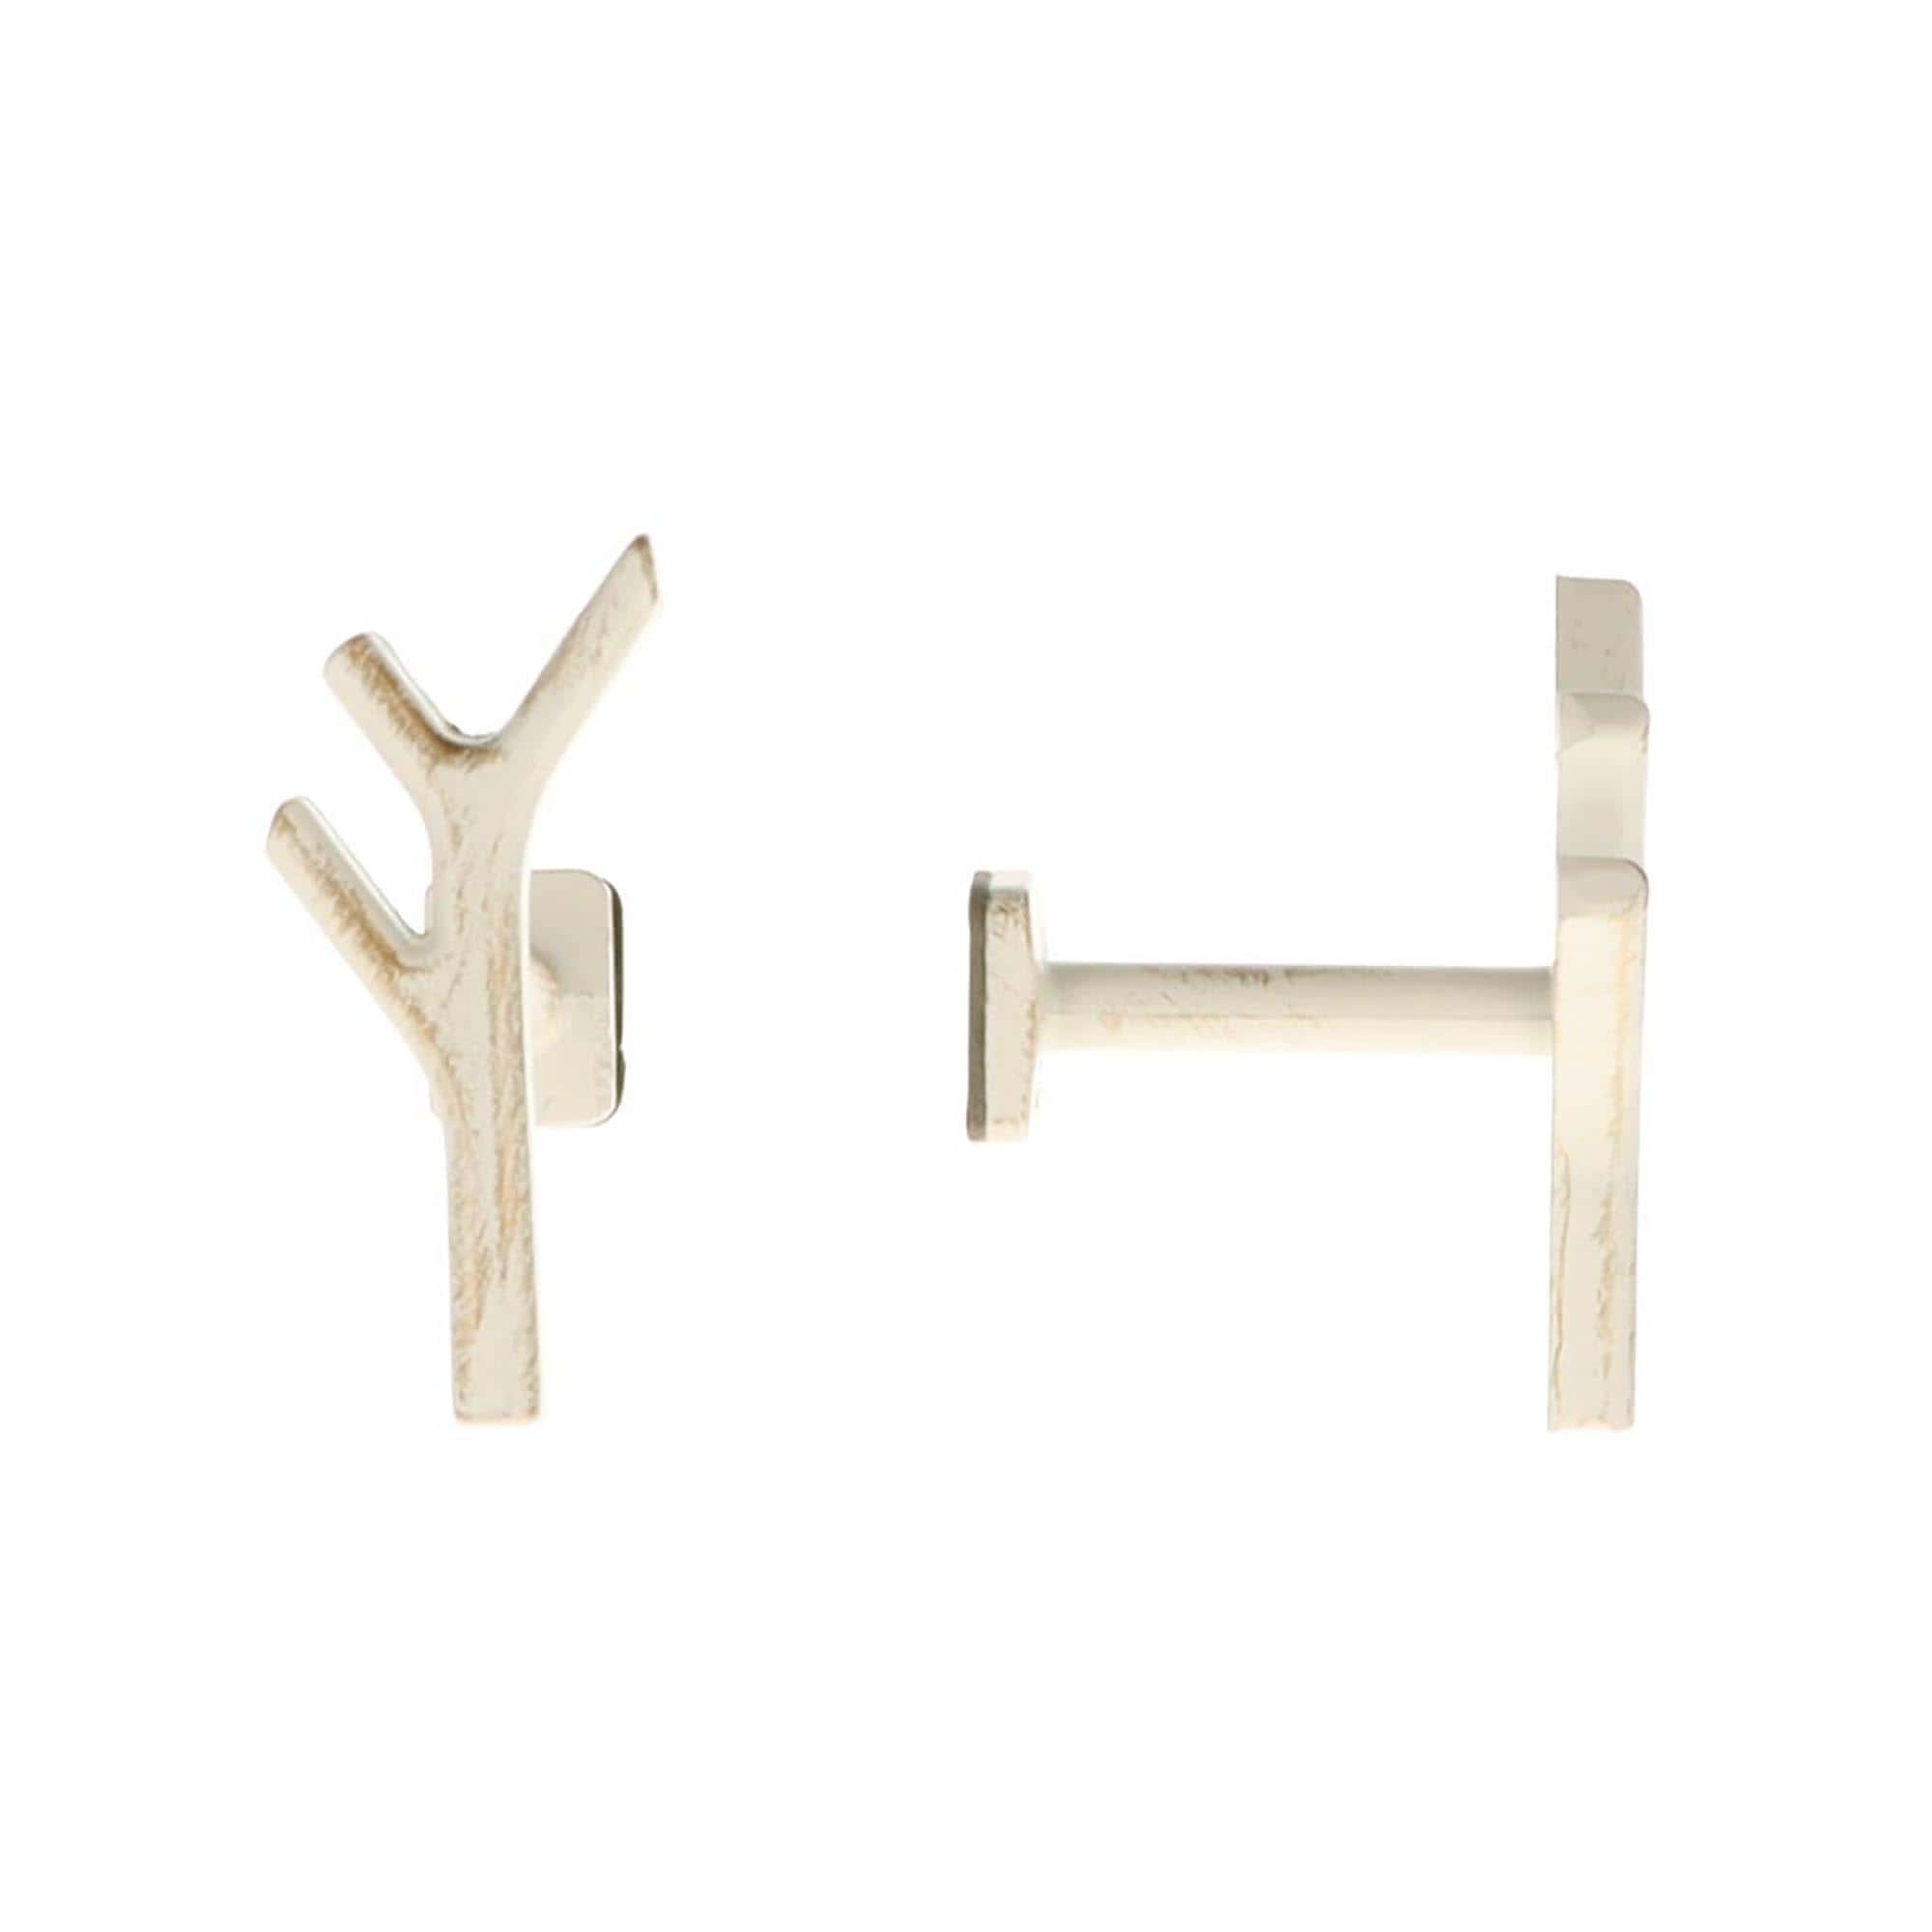 pair of metal hooks for curtain holdbacks in ecru and gold with natural design